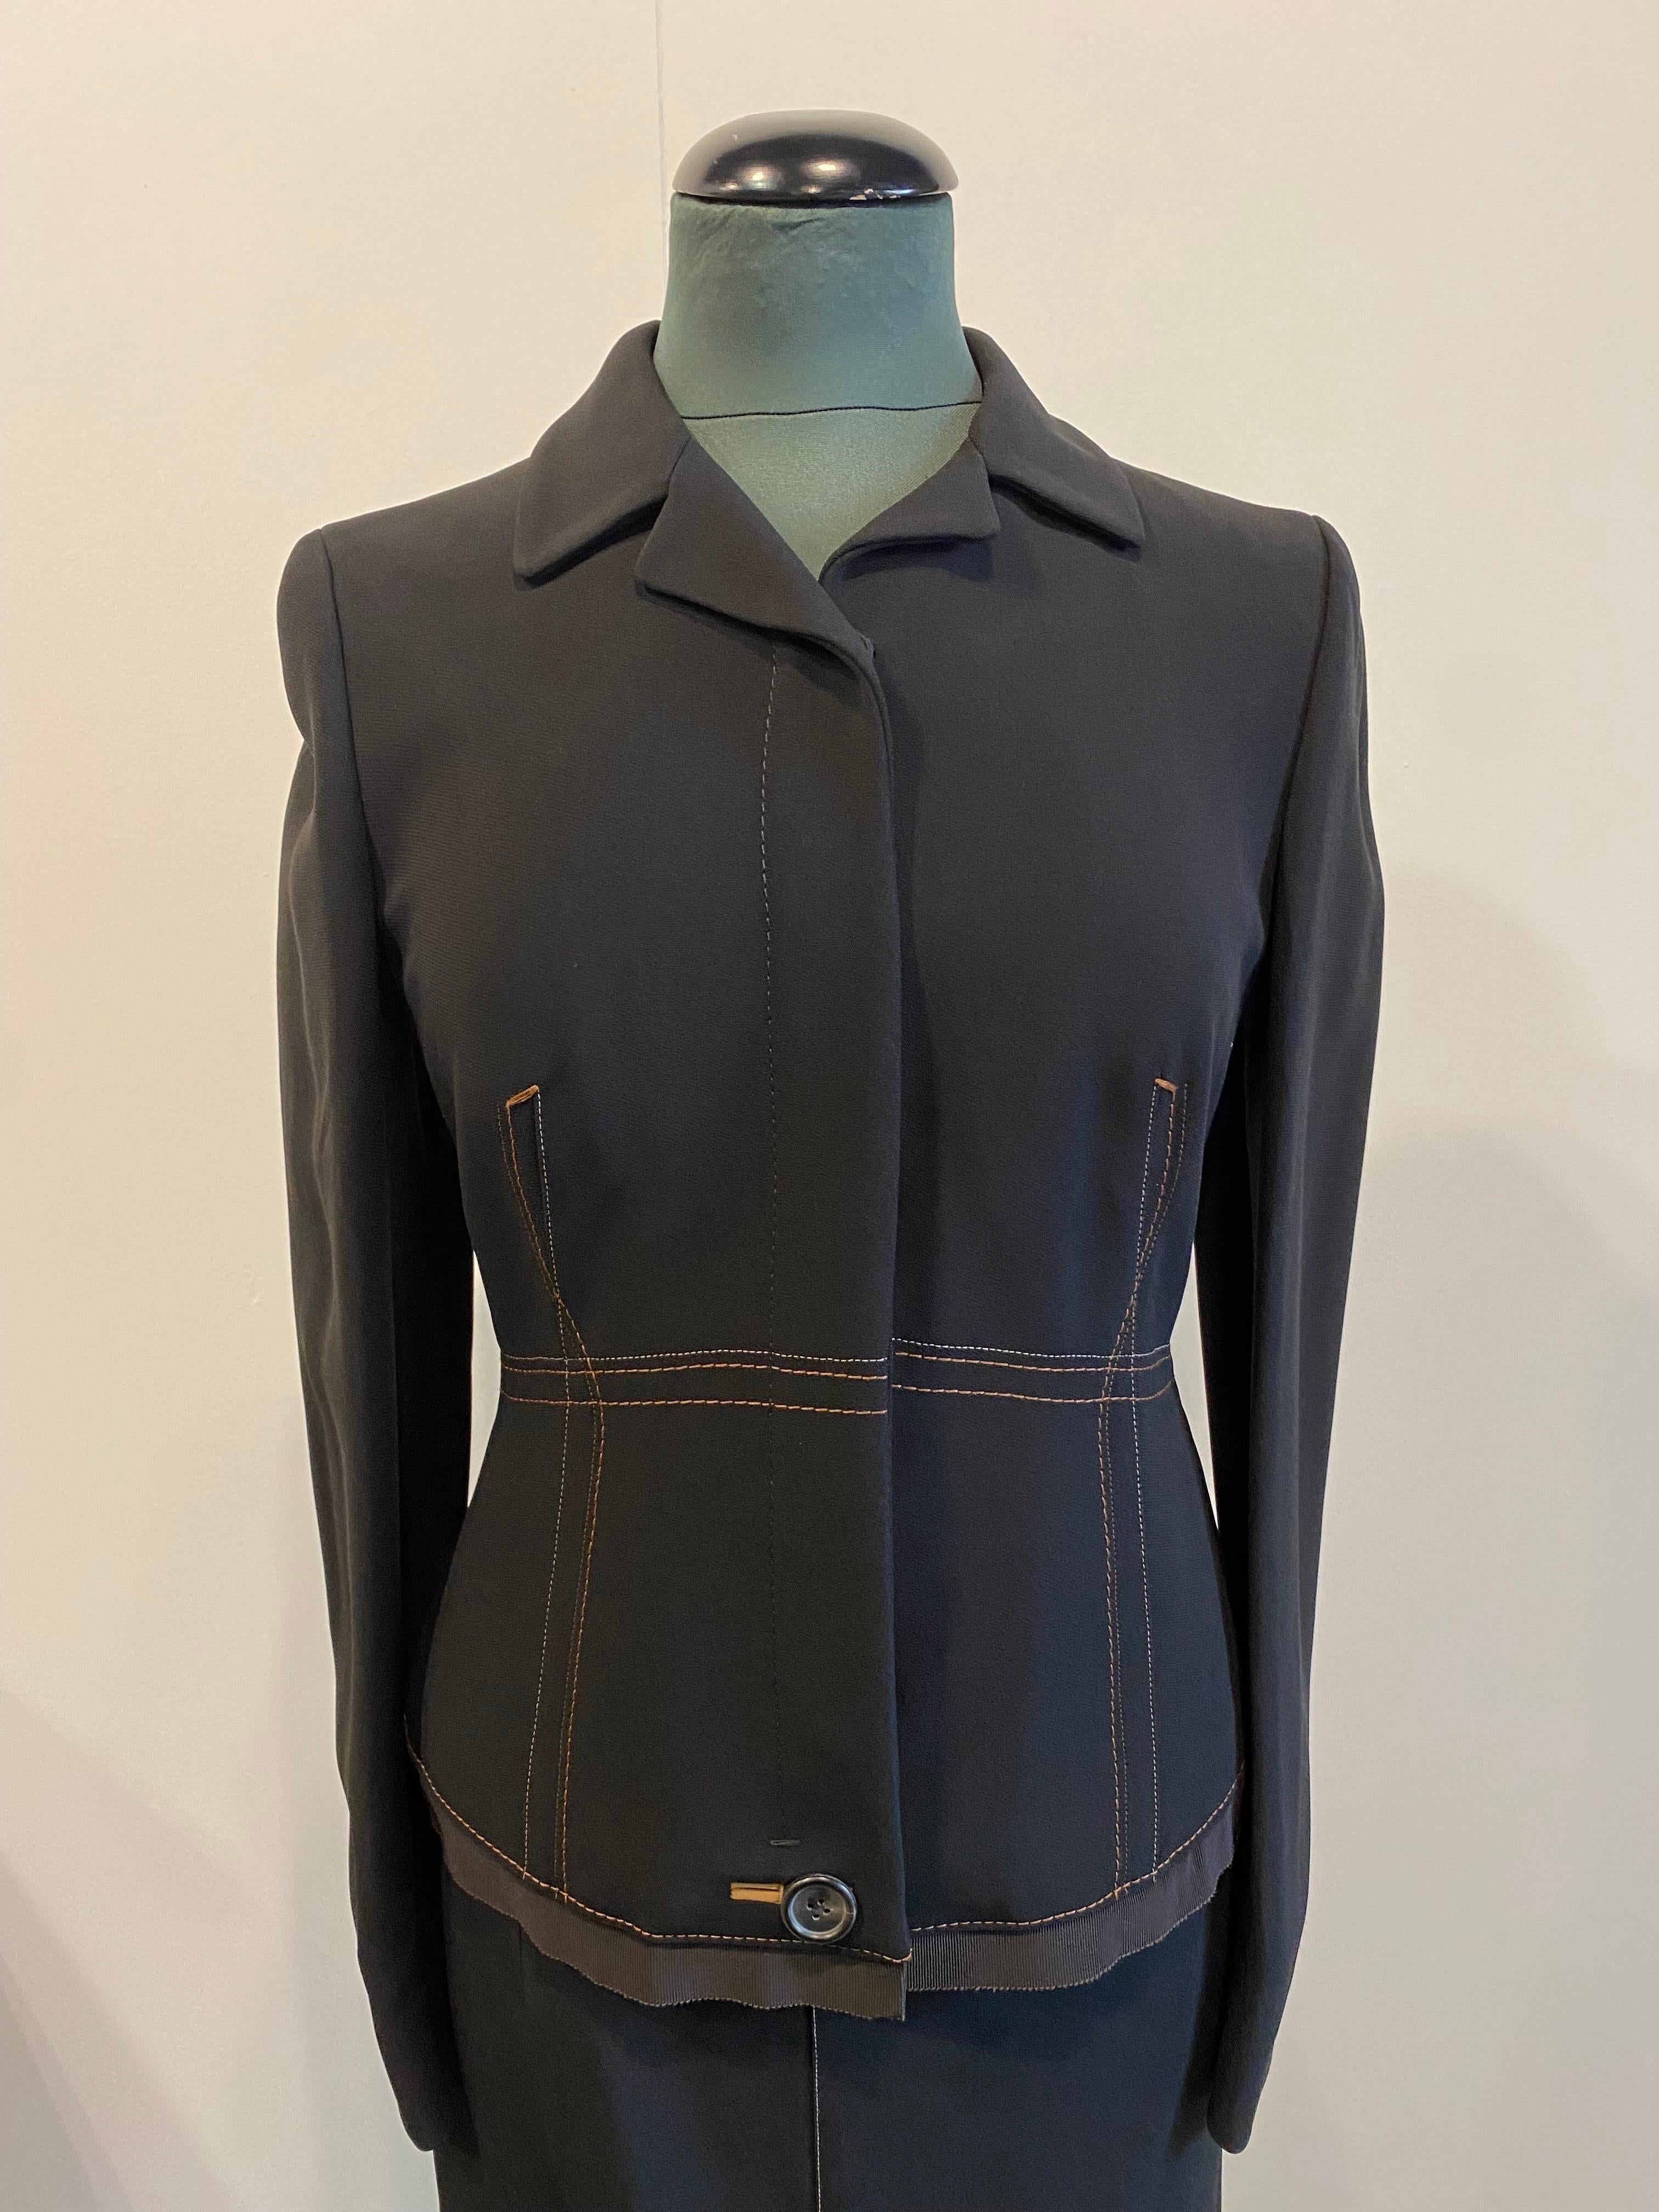 Tailleur Prada black In Excellent Condition For Sale In Carnate, IT